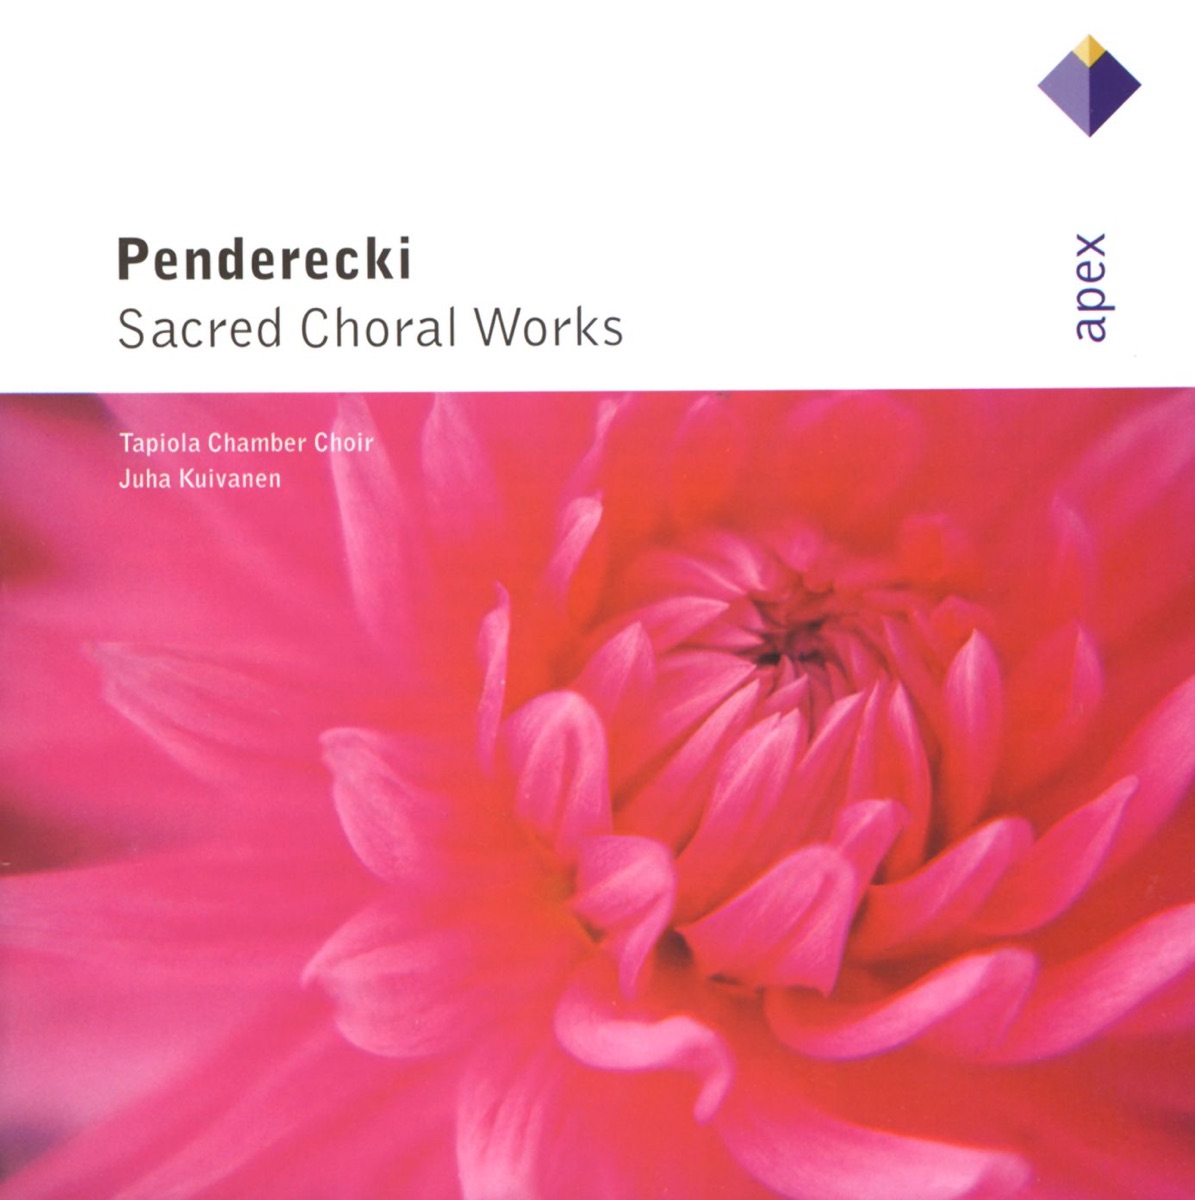 Penderecki : Stabat Mater - Complete Sacred Works for Chorus a Cappella by  Juha Kuivanen & Tapiola Chamber Choir on Apple Music